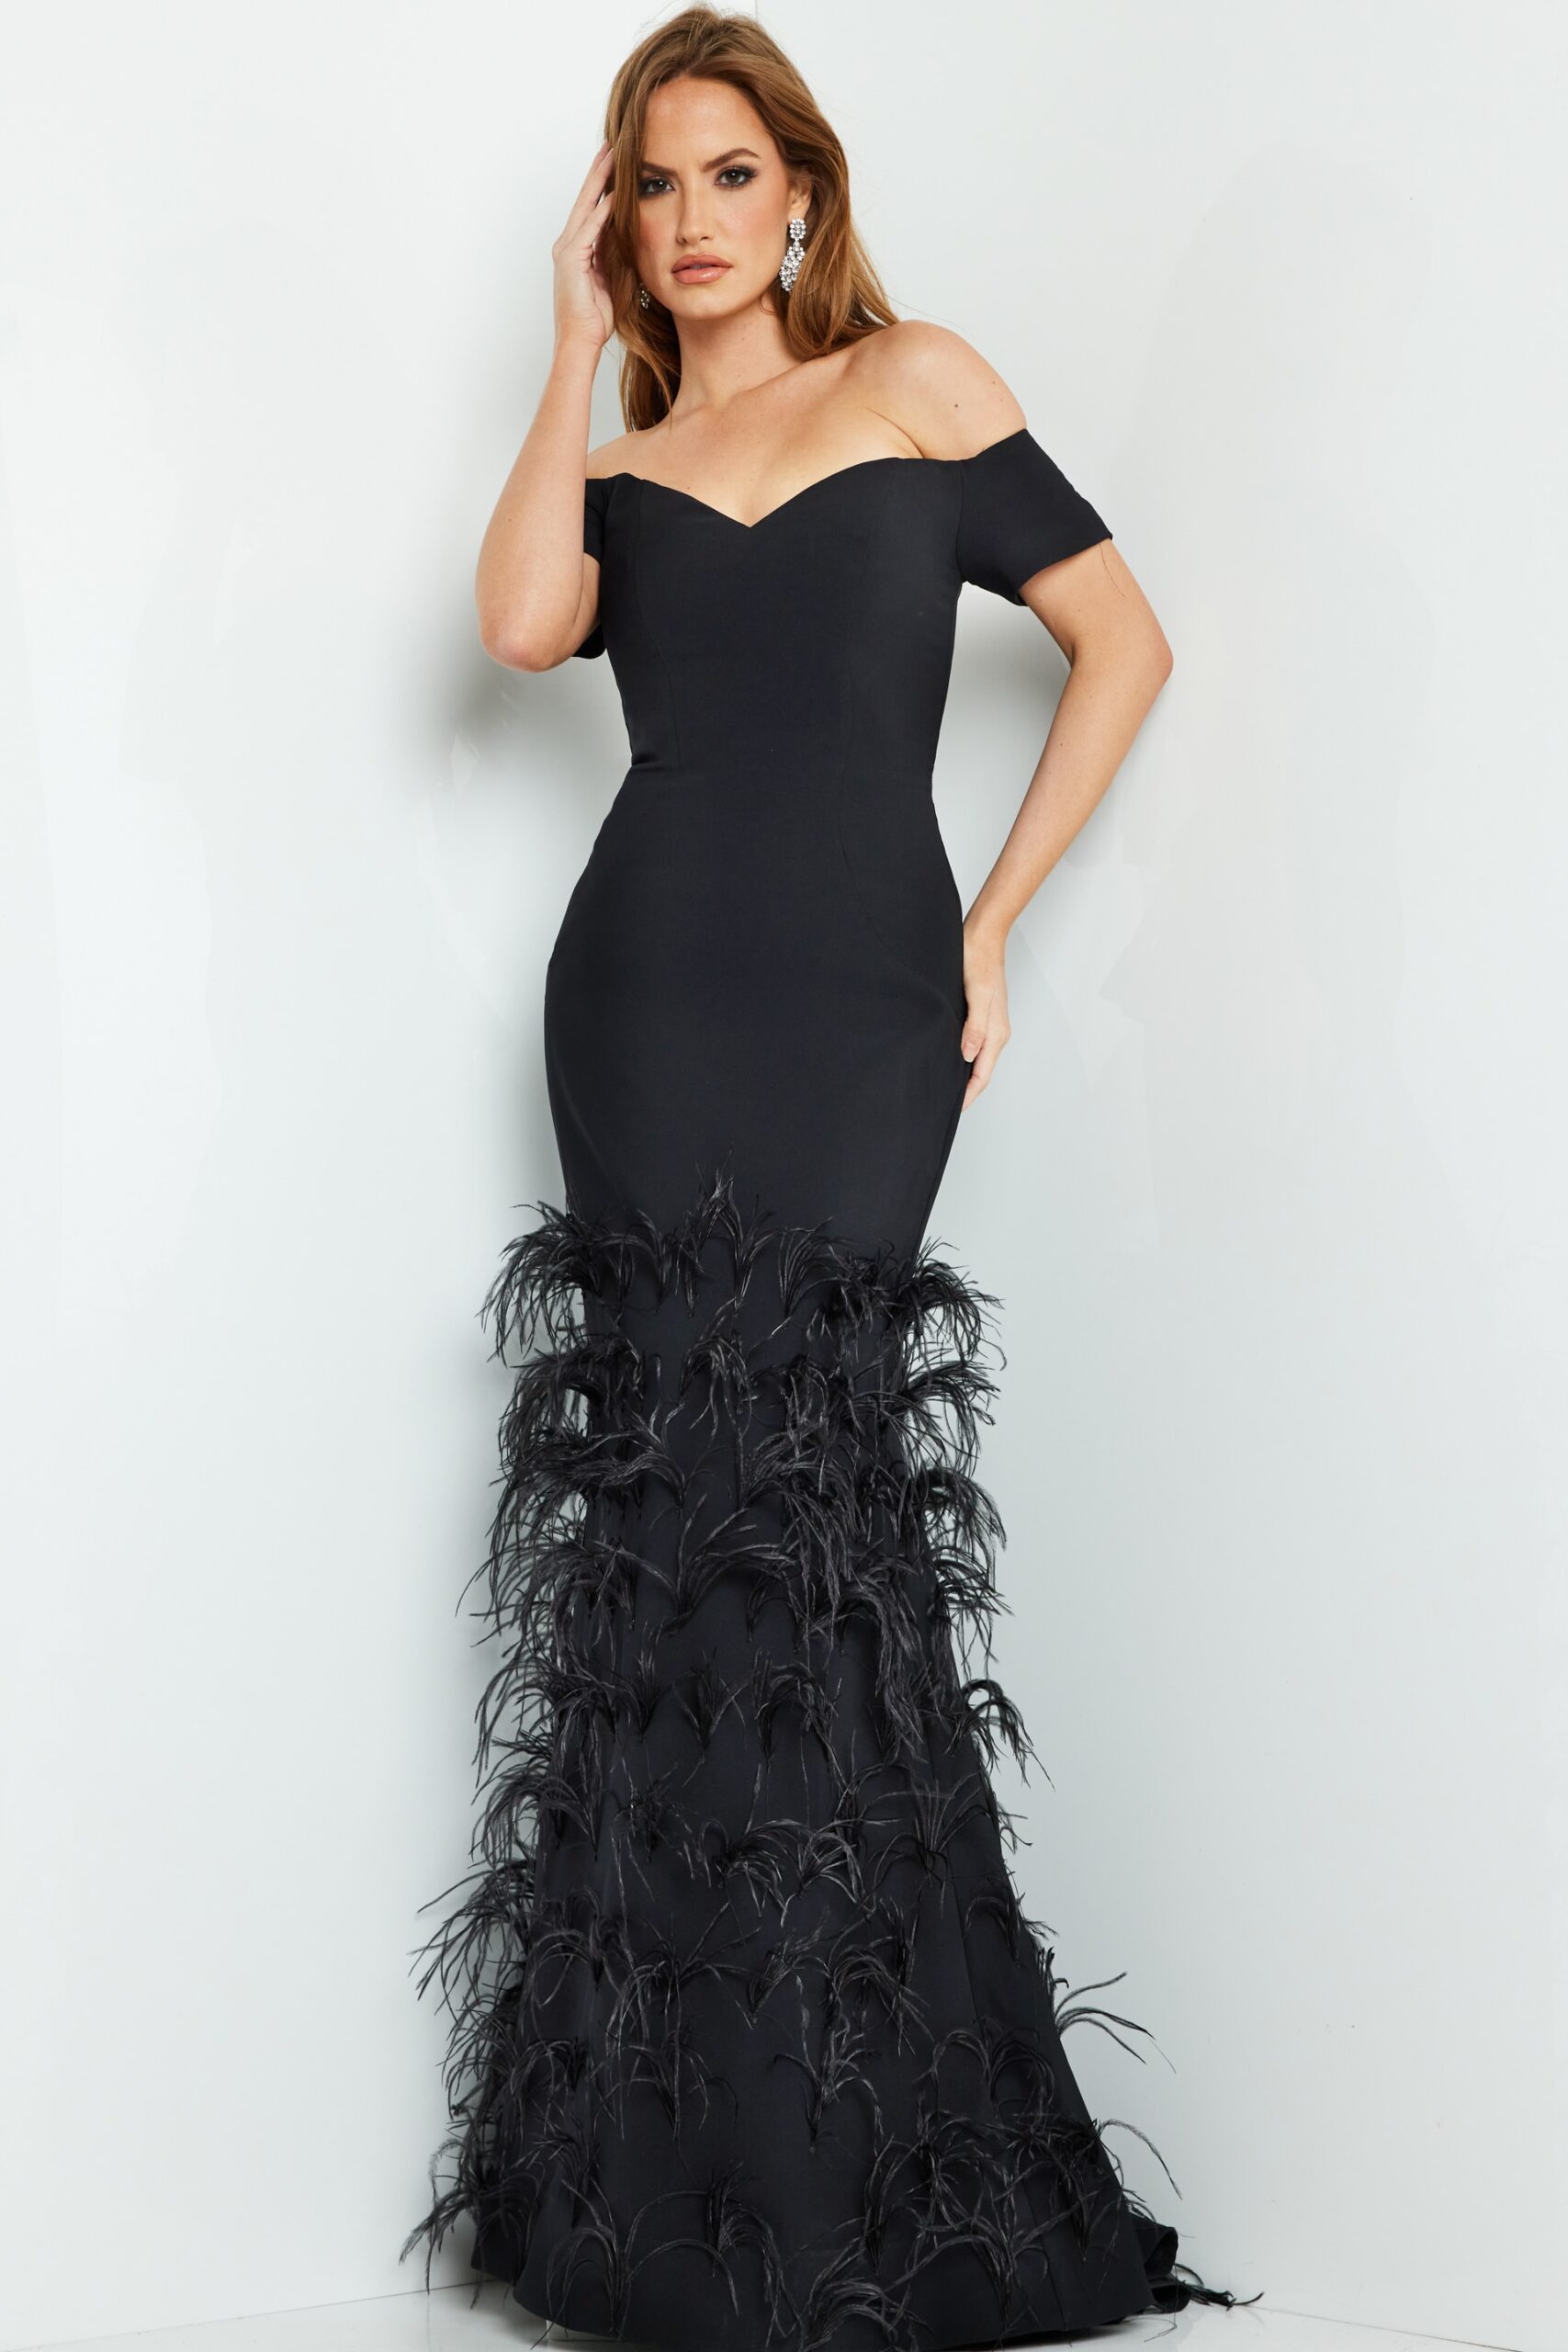 Black Mermaid Dress with Feathers on Skirt